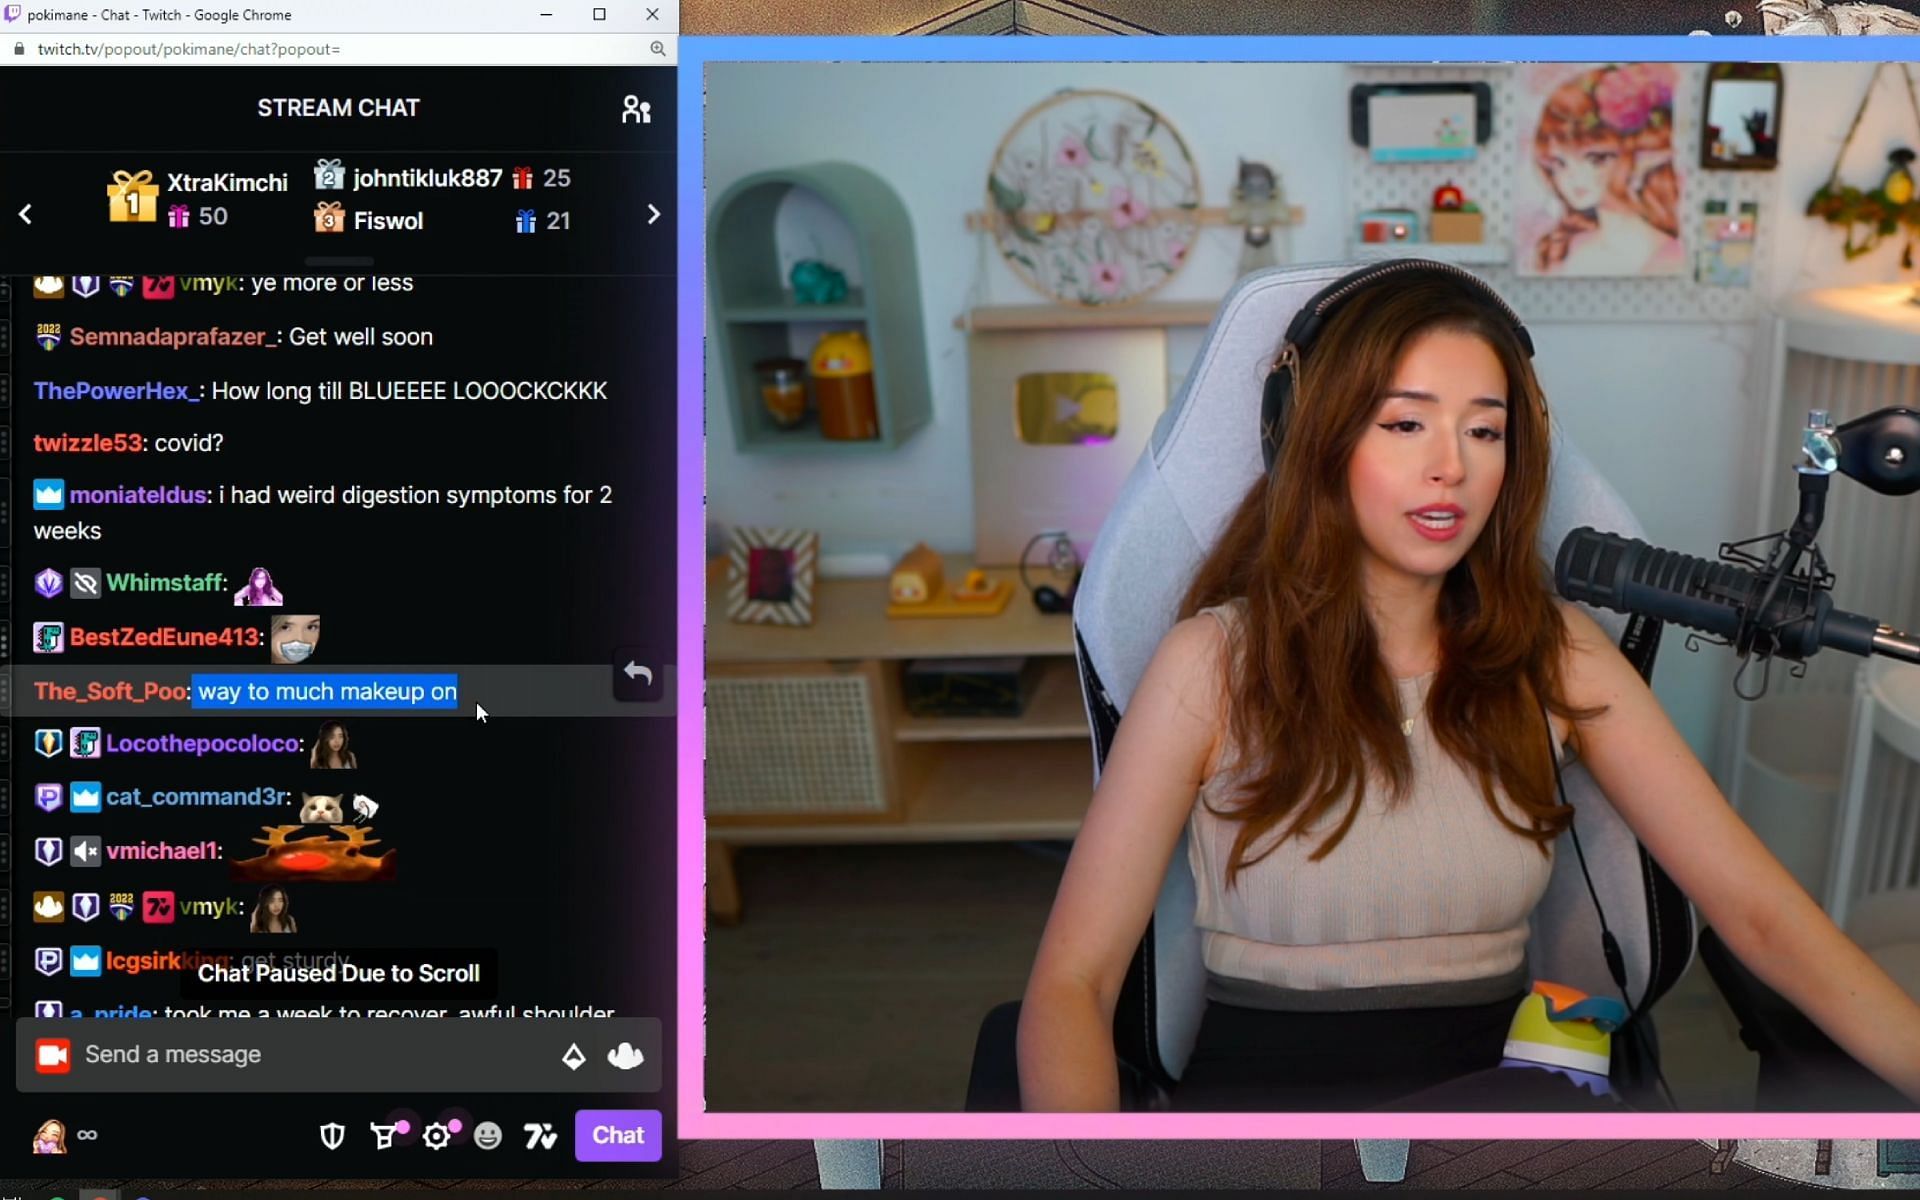 Pokimane calls out viewers who criticized her for wearing “way too much makeup”